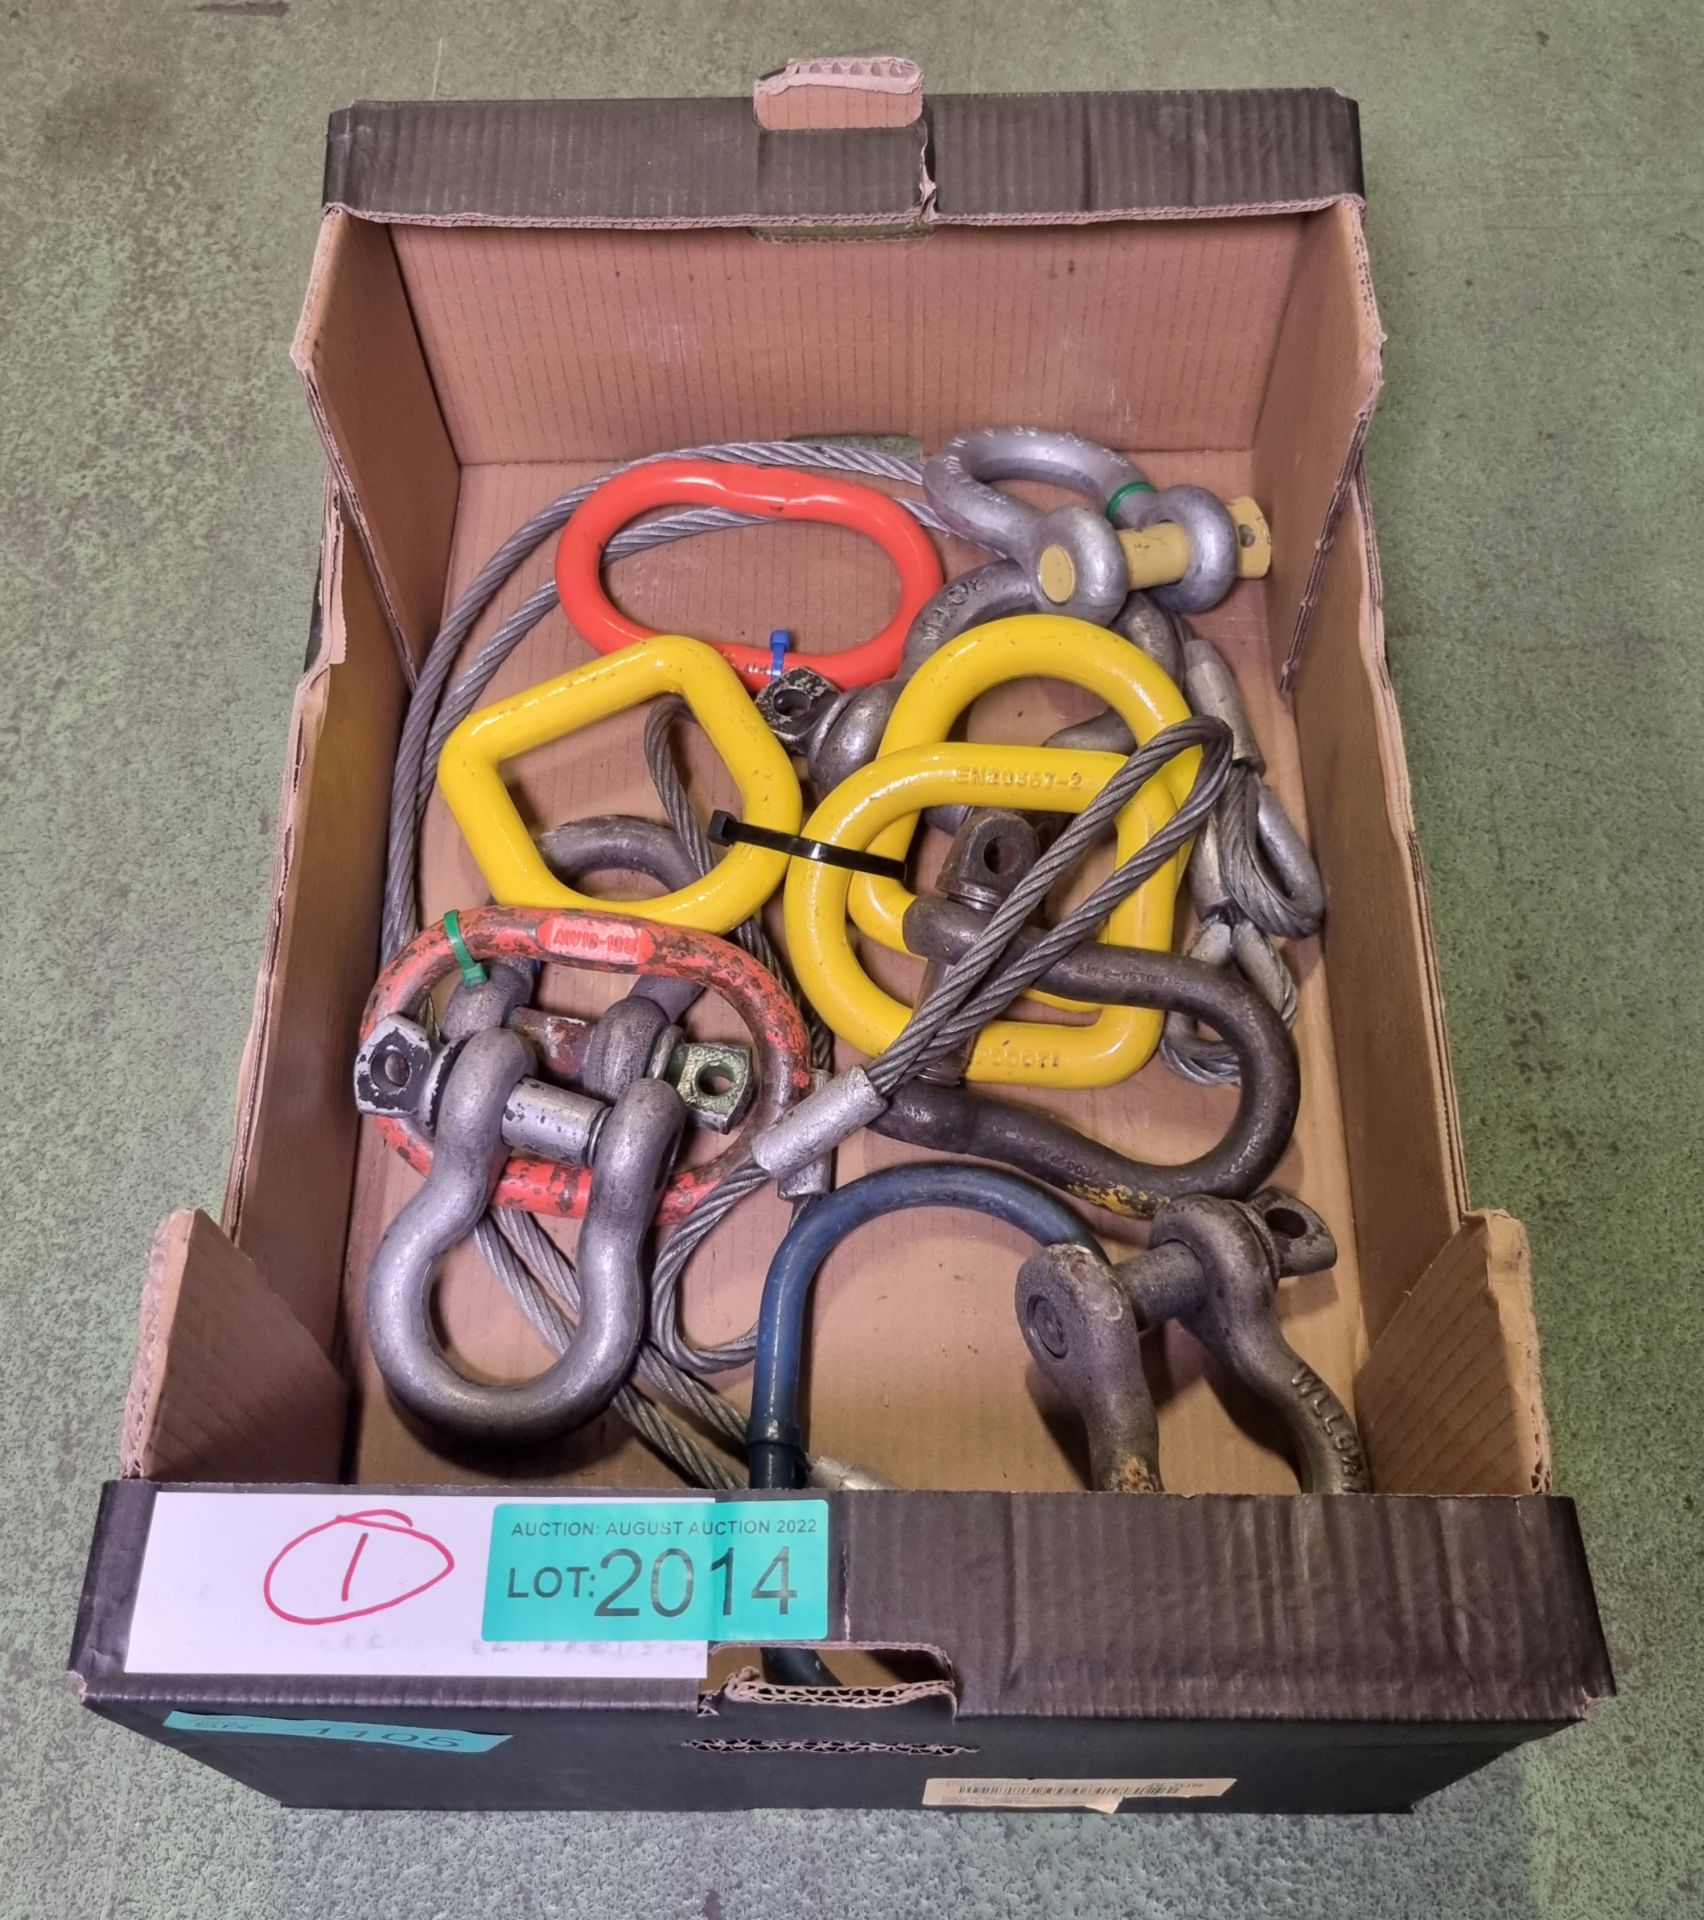 Lifting equipment - D-shackles, Strops - Image 2 of 3